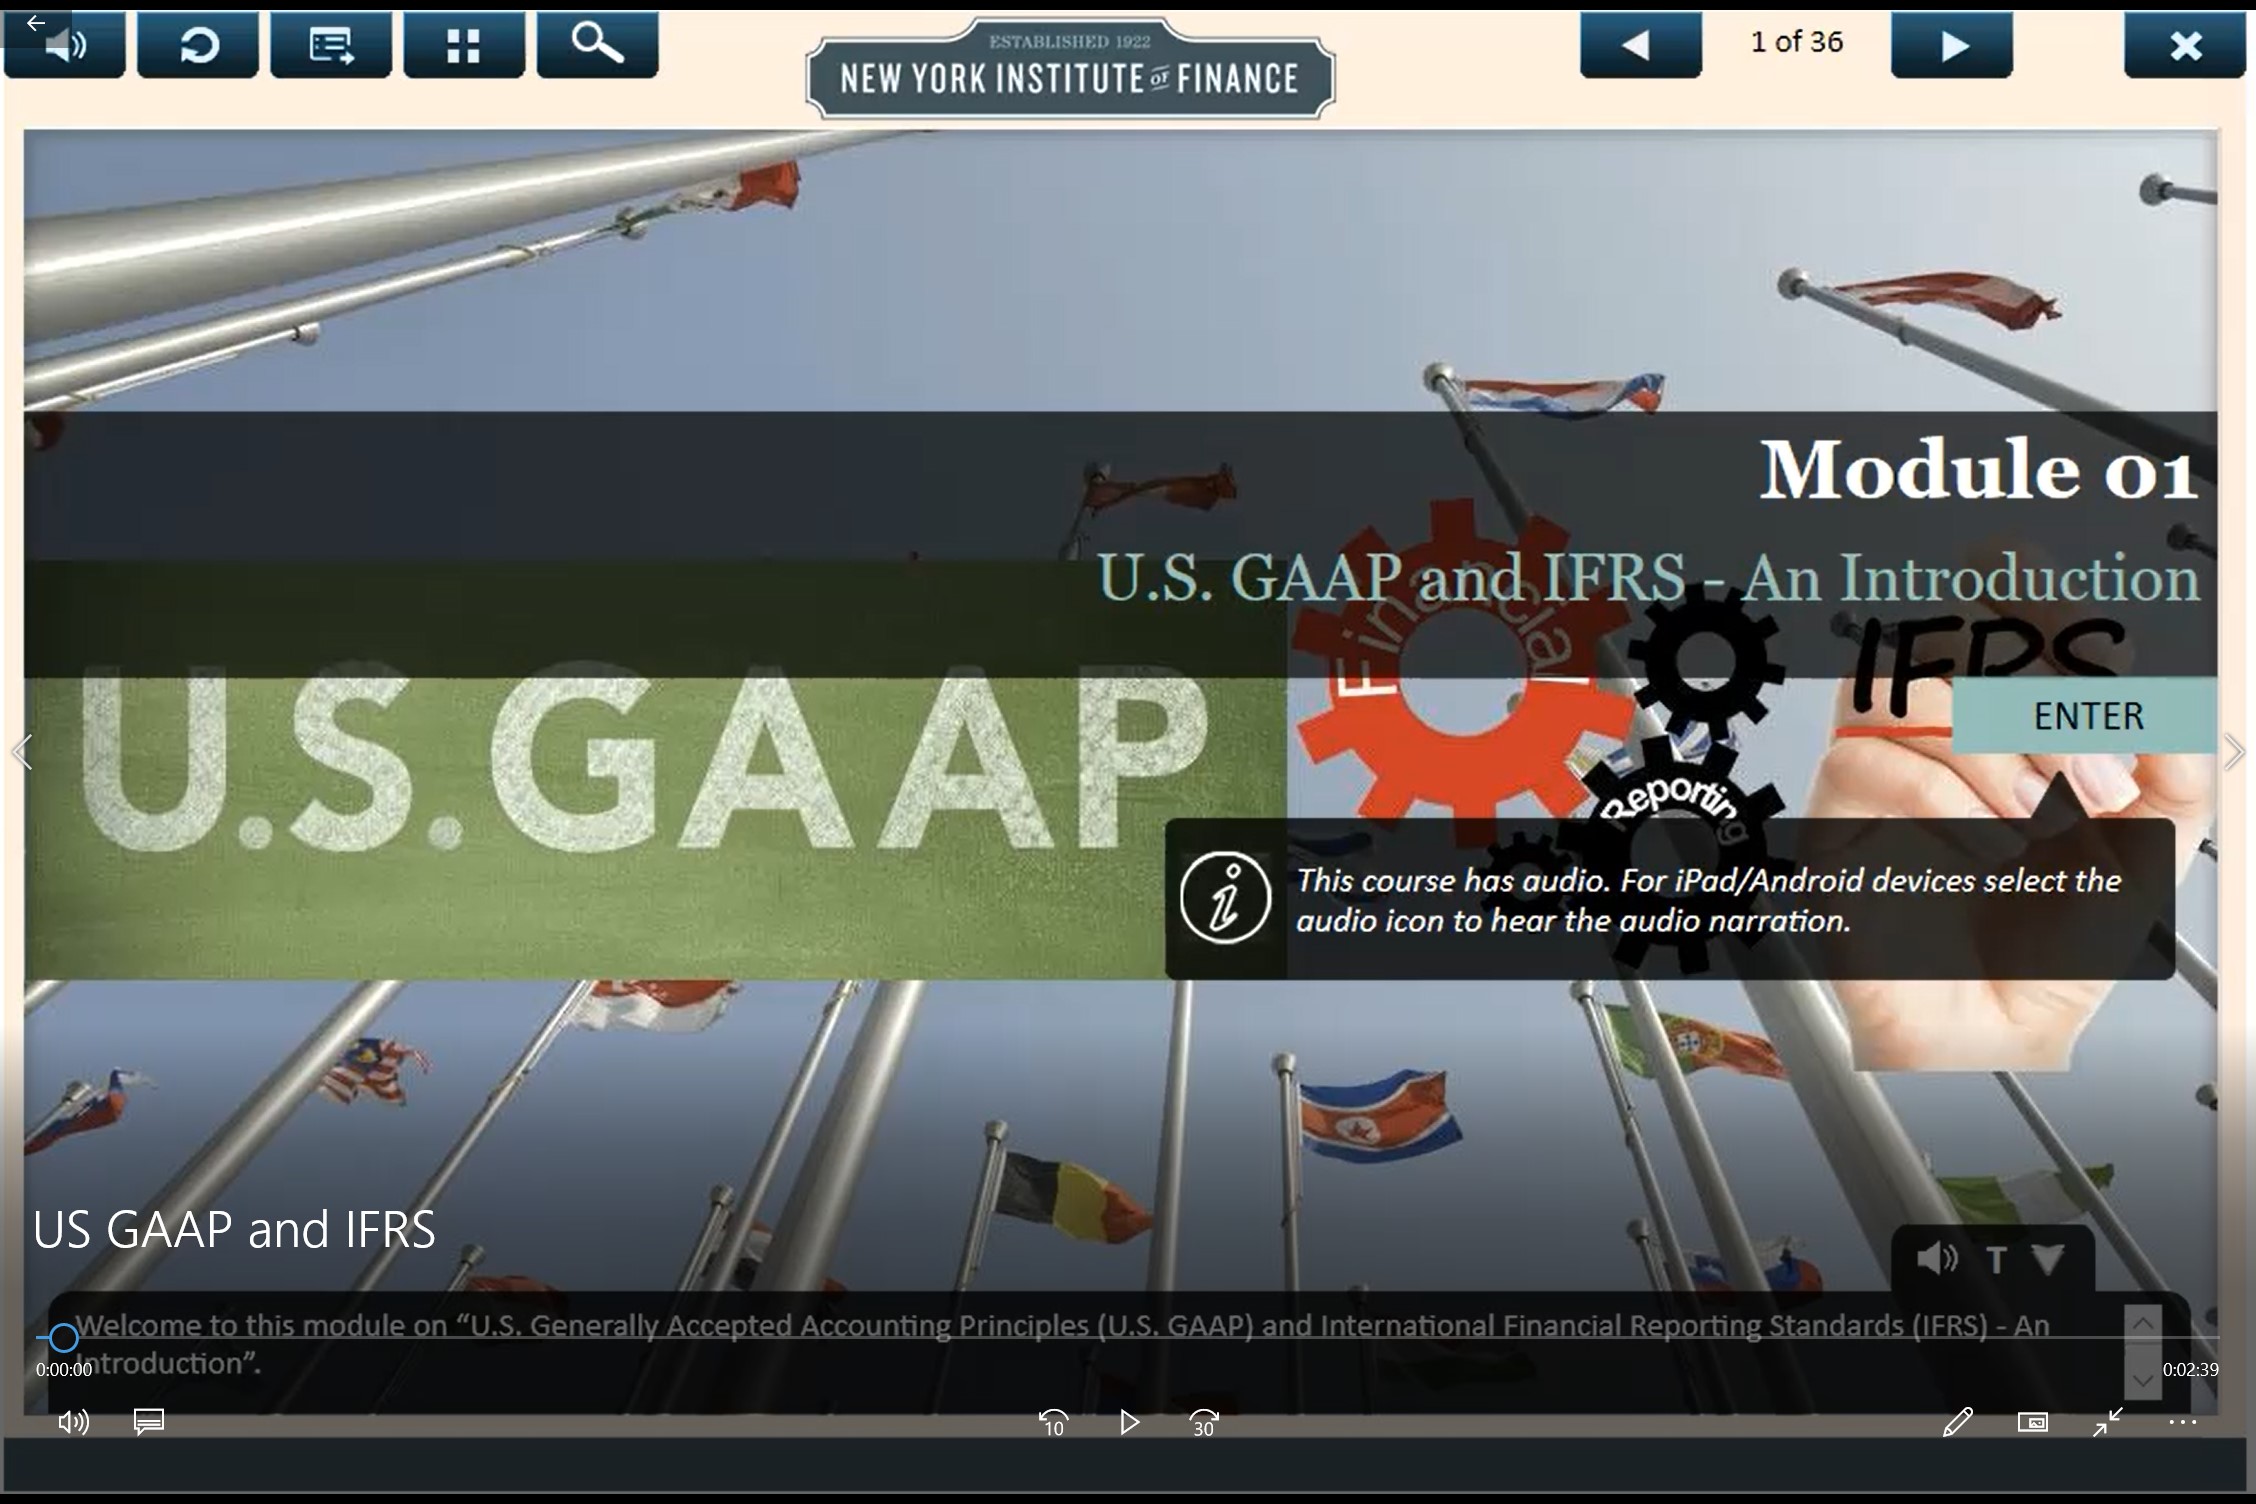 US GAAP and IFRS